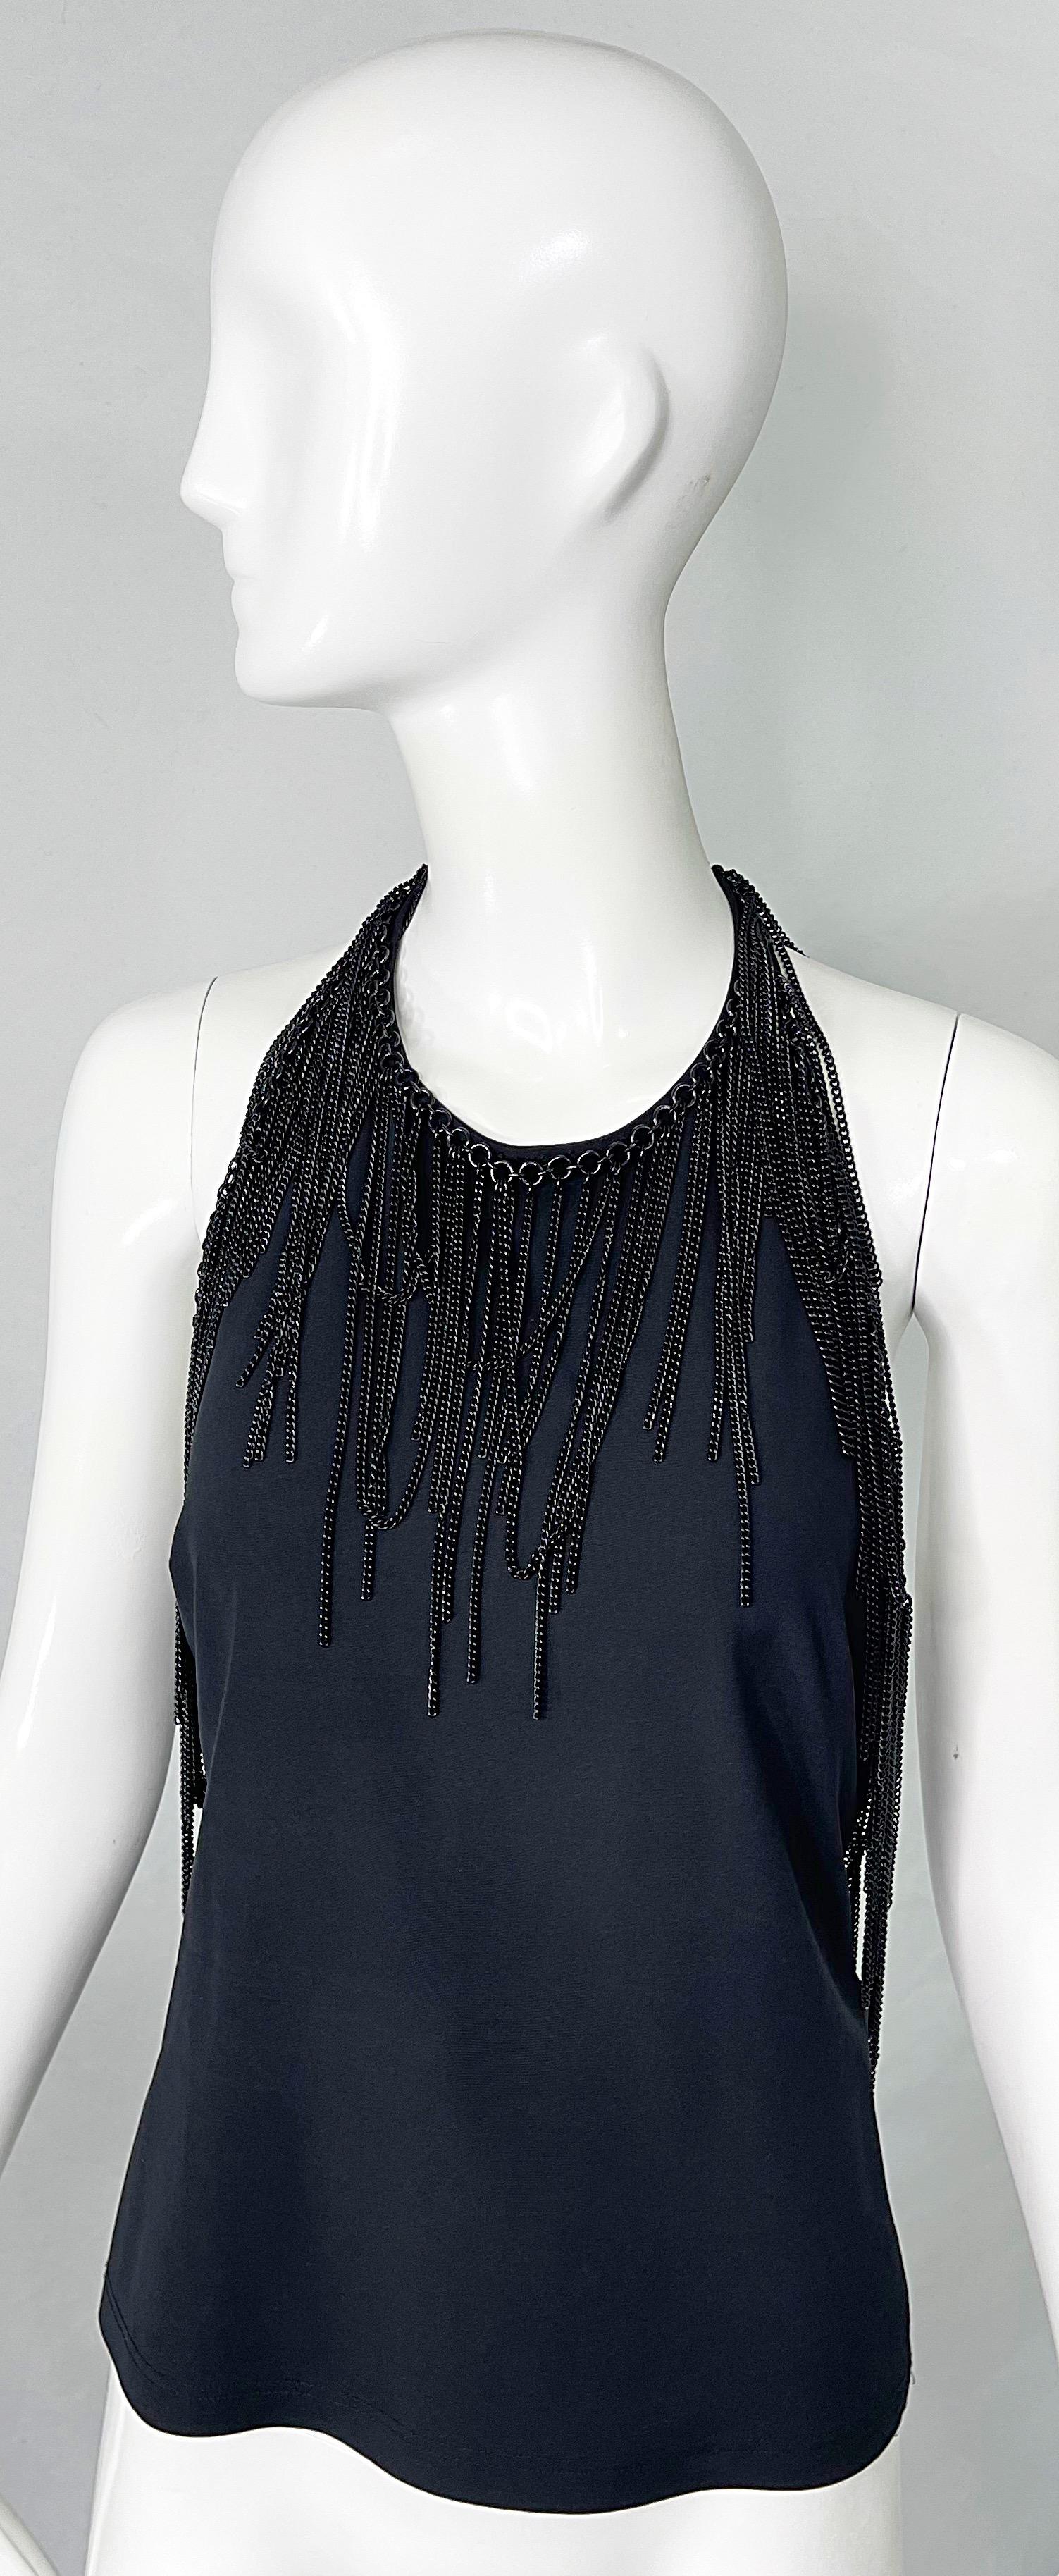 New VERSACE F/W 2005 black silk and elastane chain encrusted halter top ! Gunmetal chains around the neck. Simply slips over the head and stretches to fit. Adjustable 
hook-and-eye closure at back center neck. Can easily be dressed up or down. Pair